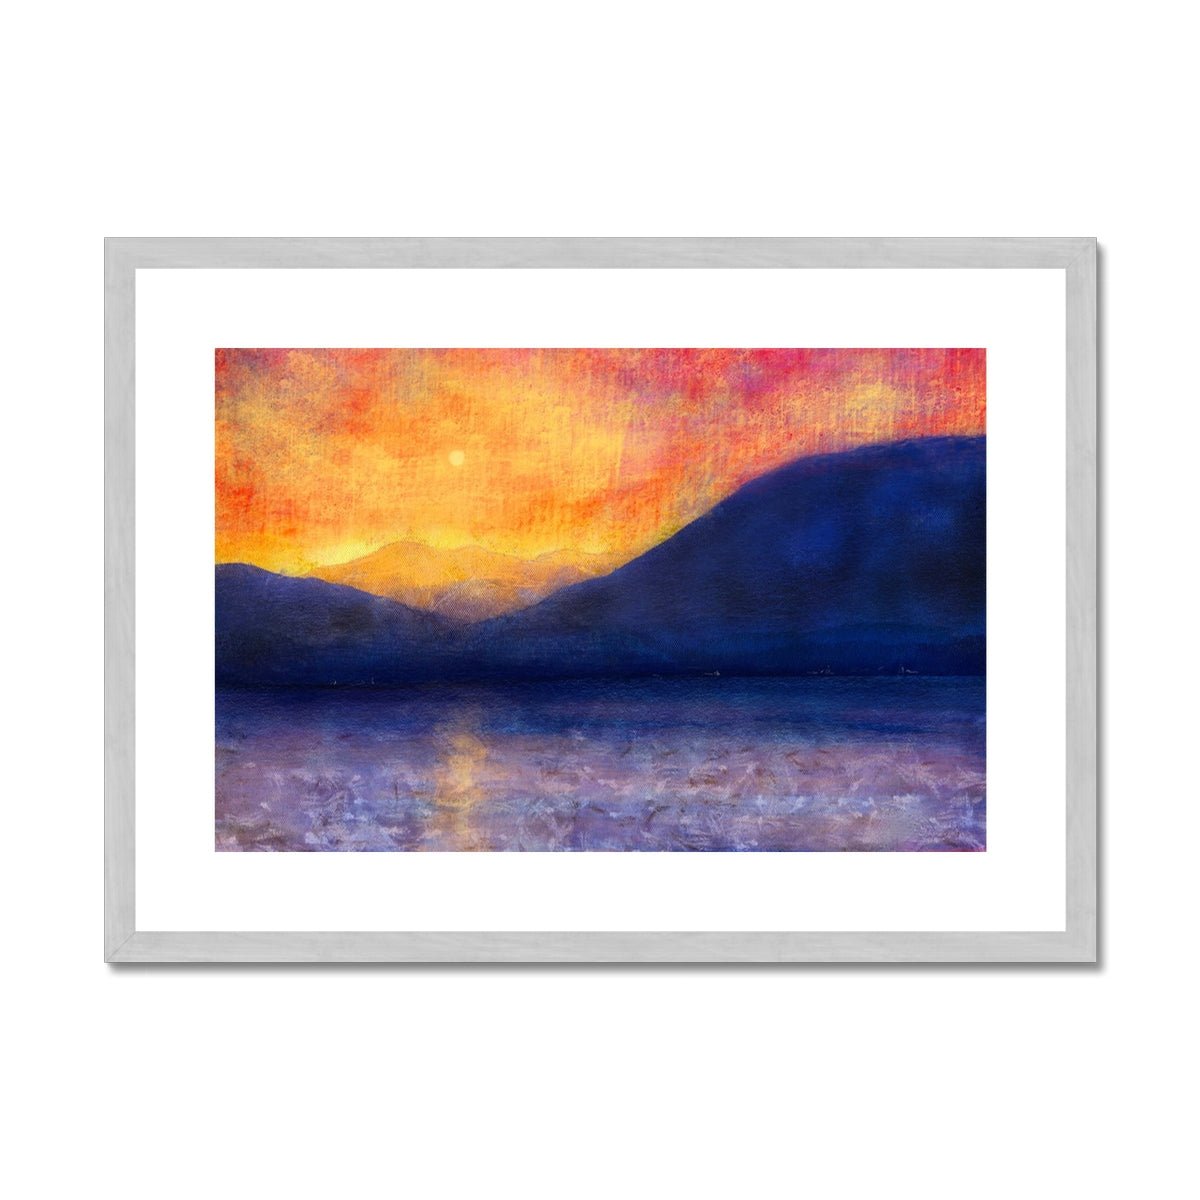 Sunset Approaching Mull Painting | Antique Framed & Mounted Prints From Scotland-Antique Framed & Mounted Prints-Hebridean Islands Art Gallery-A2 Landscape-Silver Frame-Paintings, Prints, Homeware, Art Gifts From Scotland By Scottish Artist Kevin Hunter